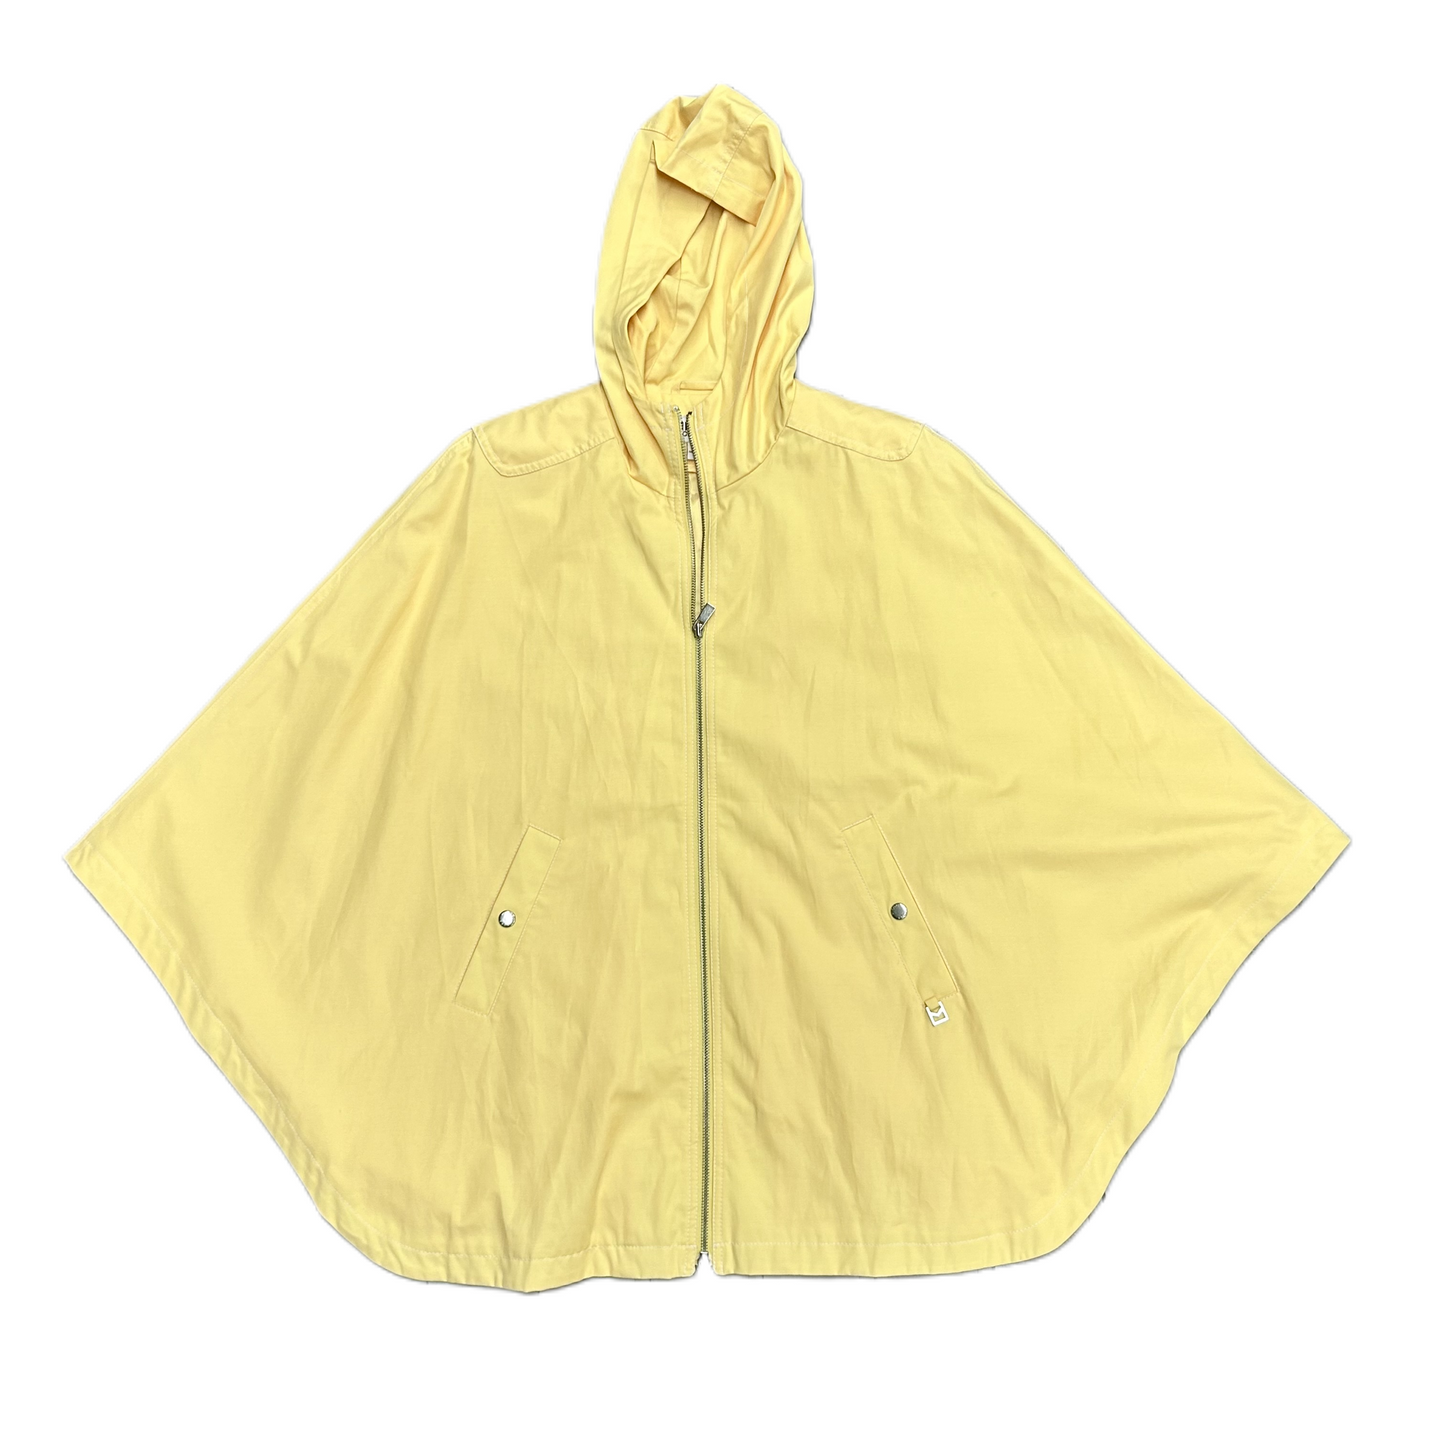 Yellow Coat Designer By Michael By Michael Kors, Size: M